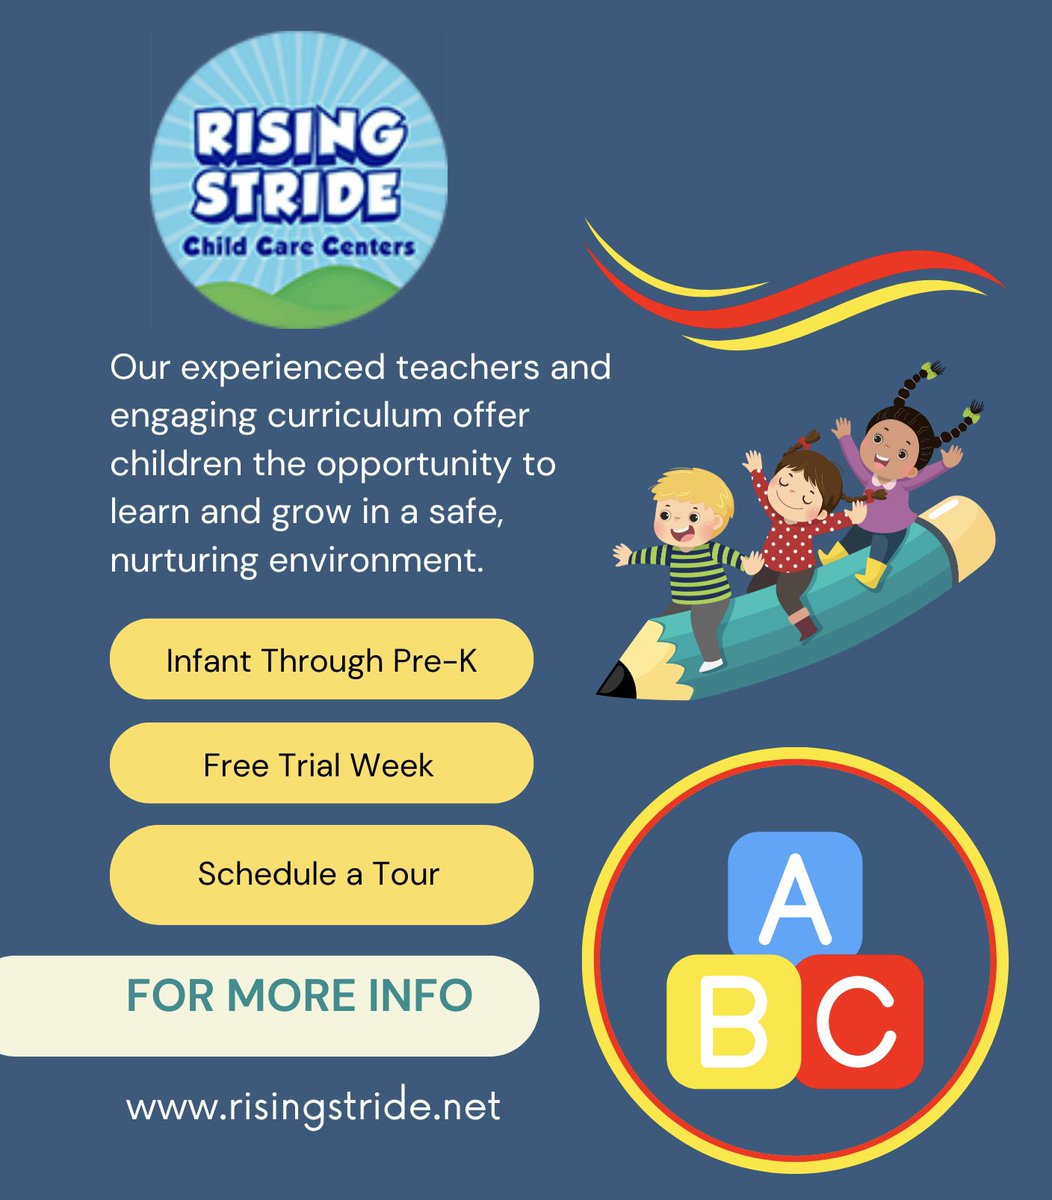 At Rising Stride we are shaping young minds, & fostering bright futures. Enroll Now at risingstride.net  #childcare #childcarecenter #preschool #learning #learnandgrow #delcopa